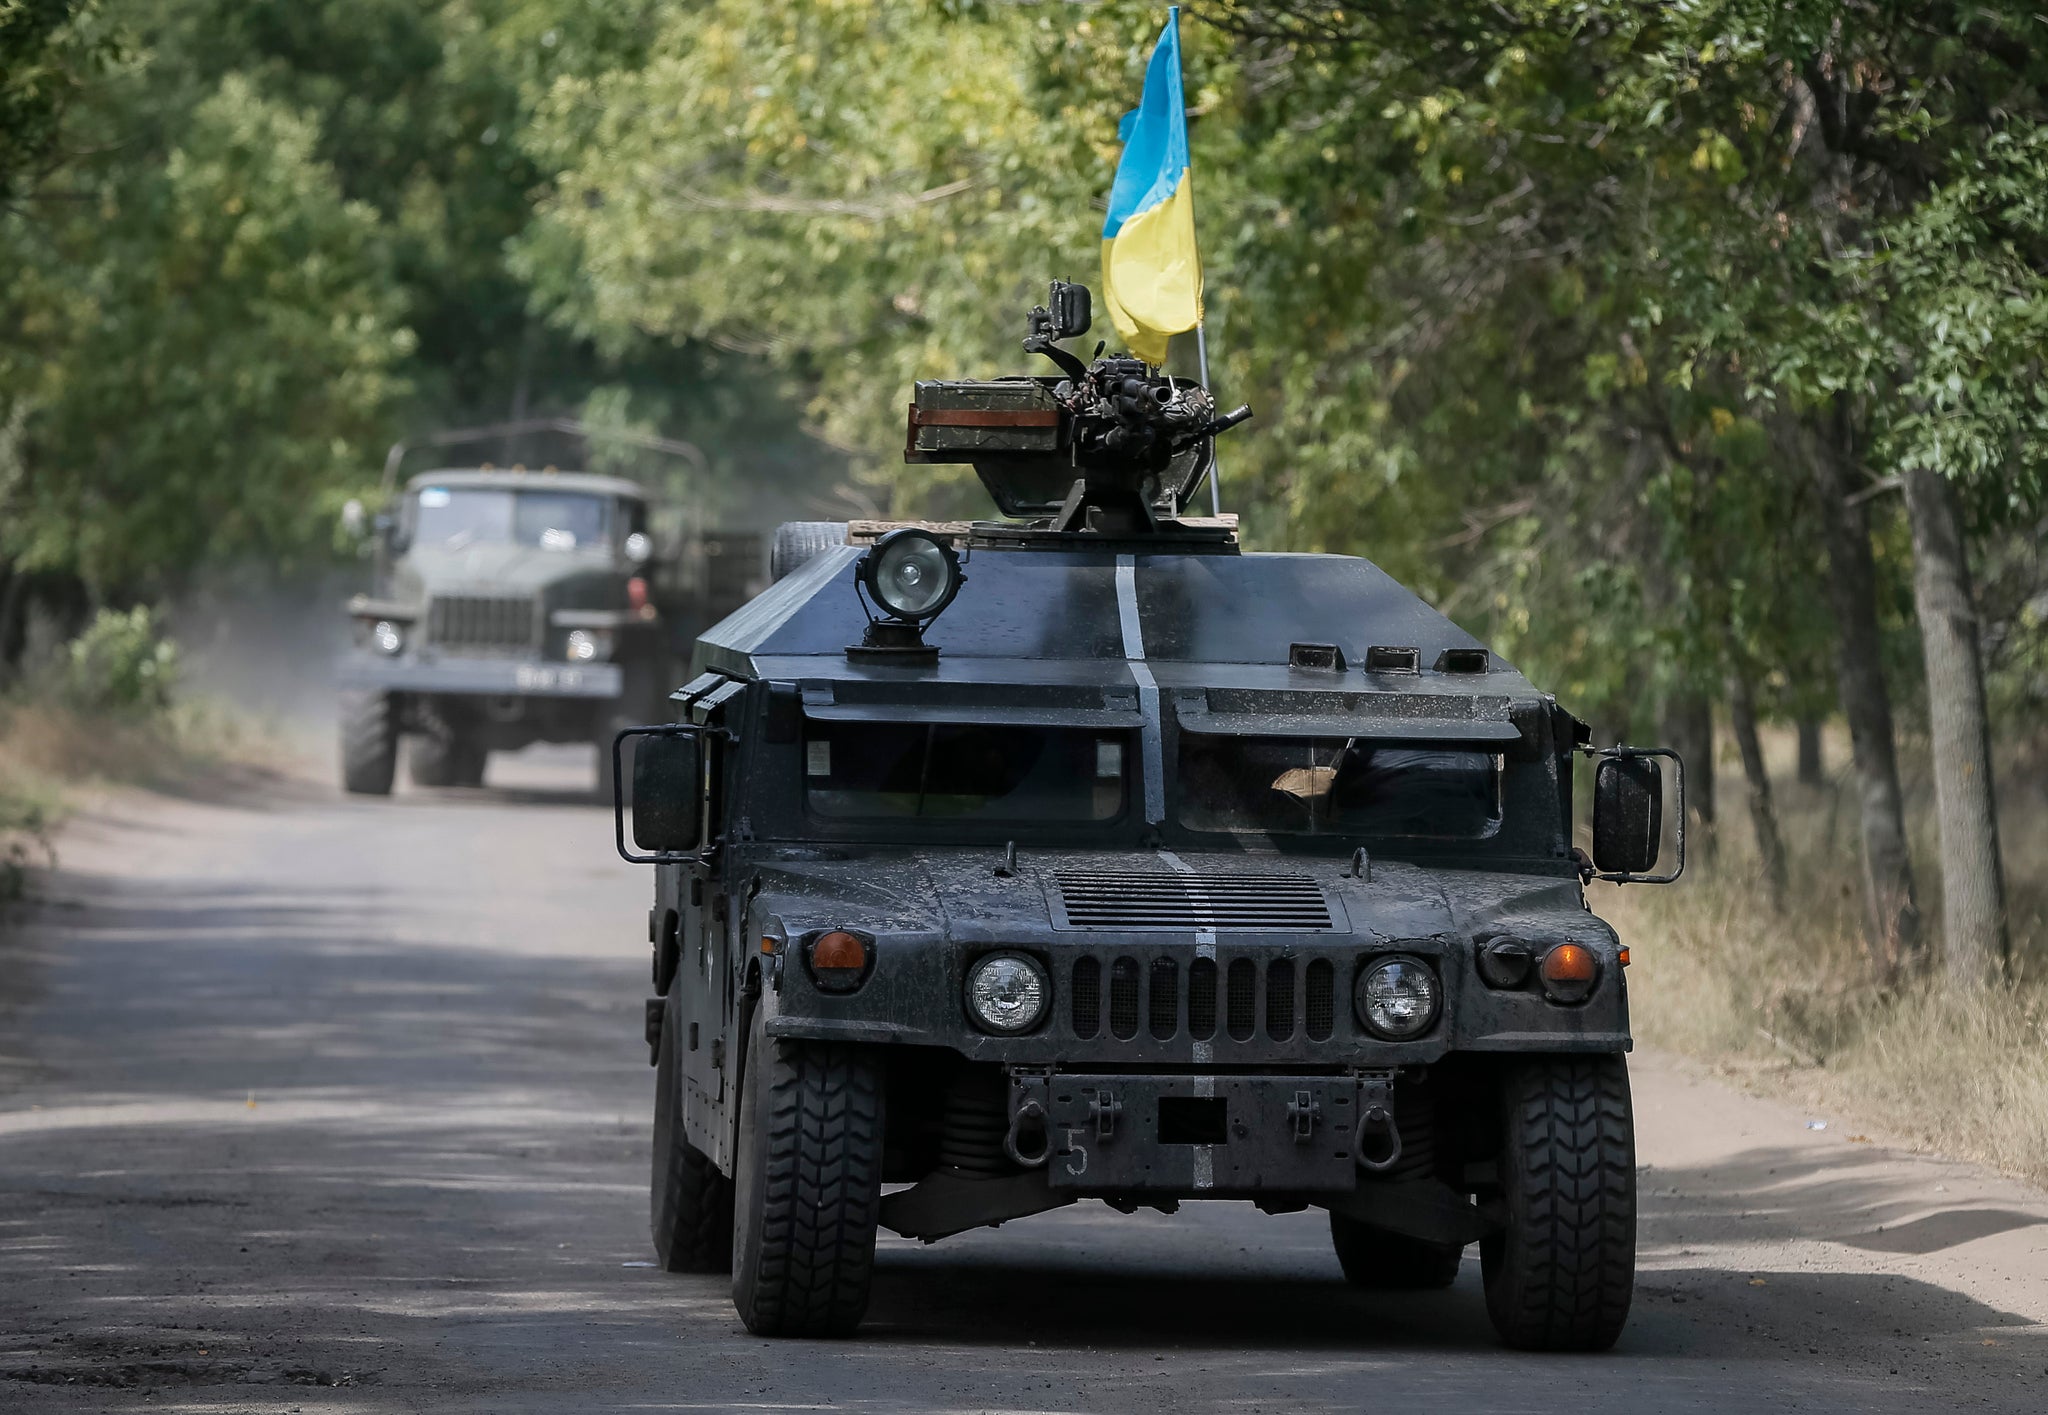 Ukrainian servicemen ride in an armoured vehicle as the country's Defence Minister accuses Russia of starting a 'great war'